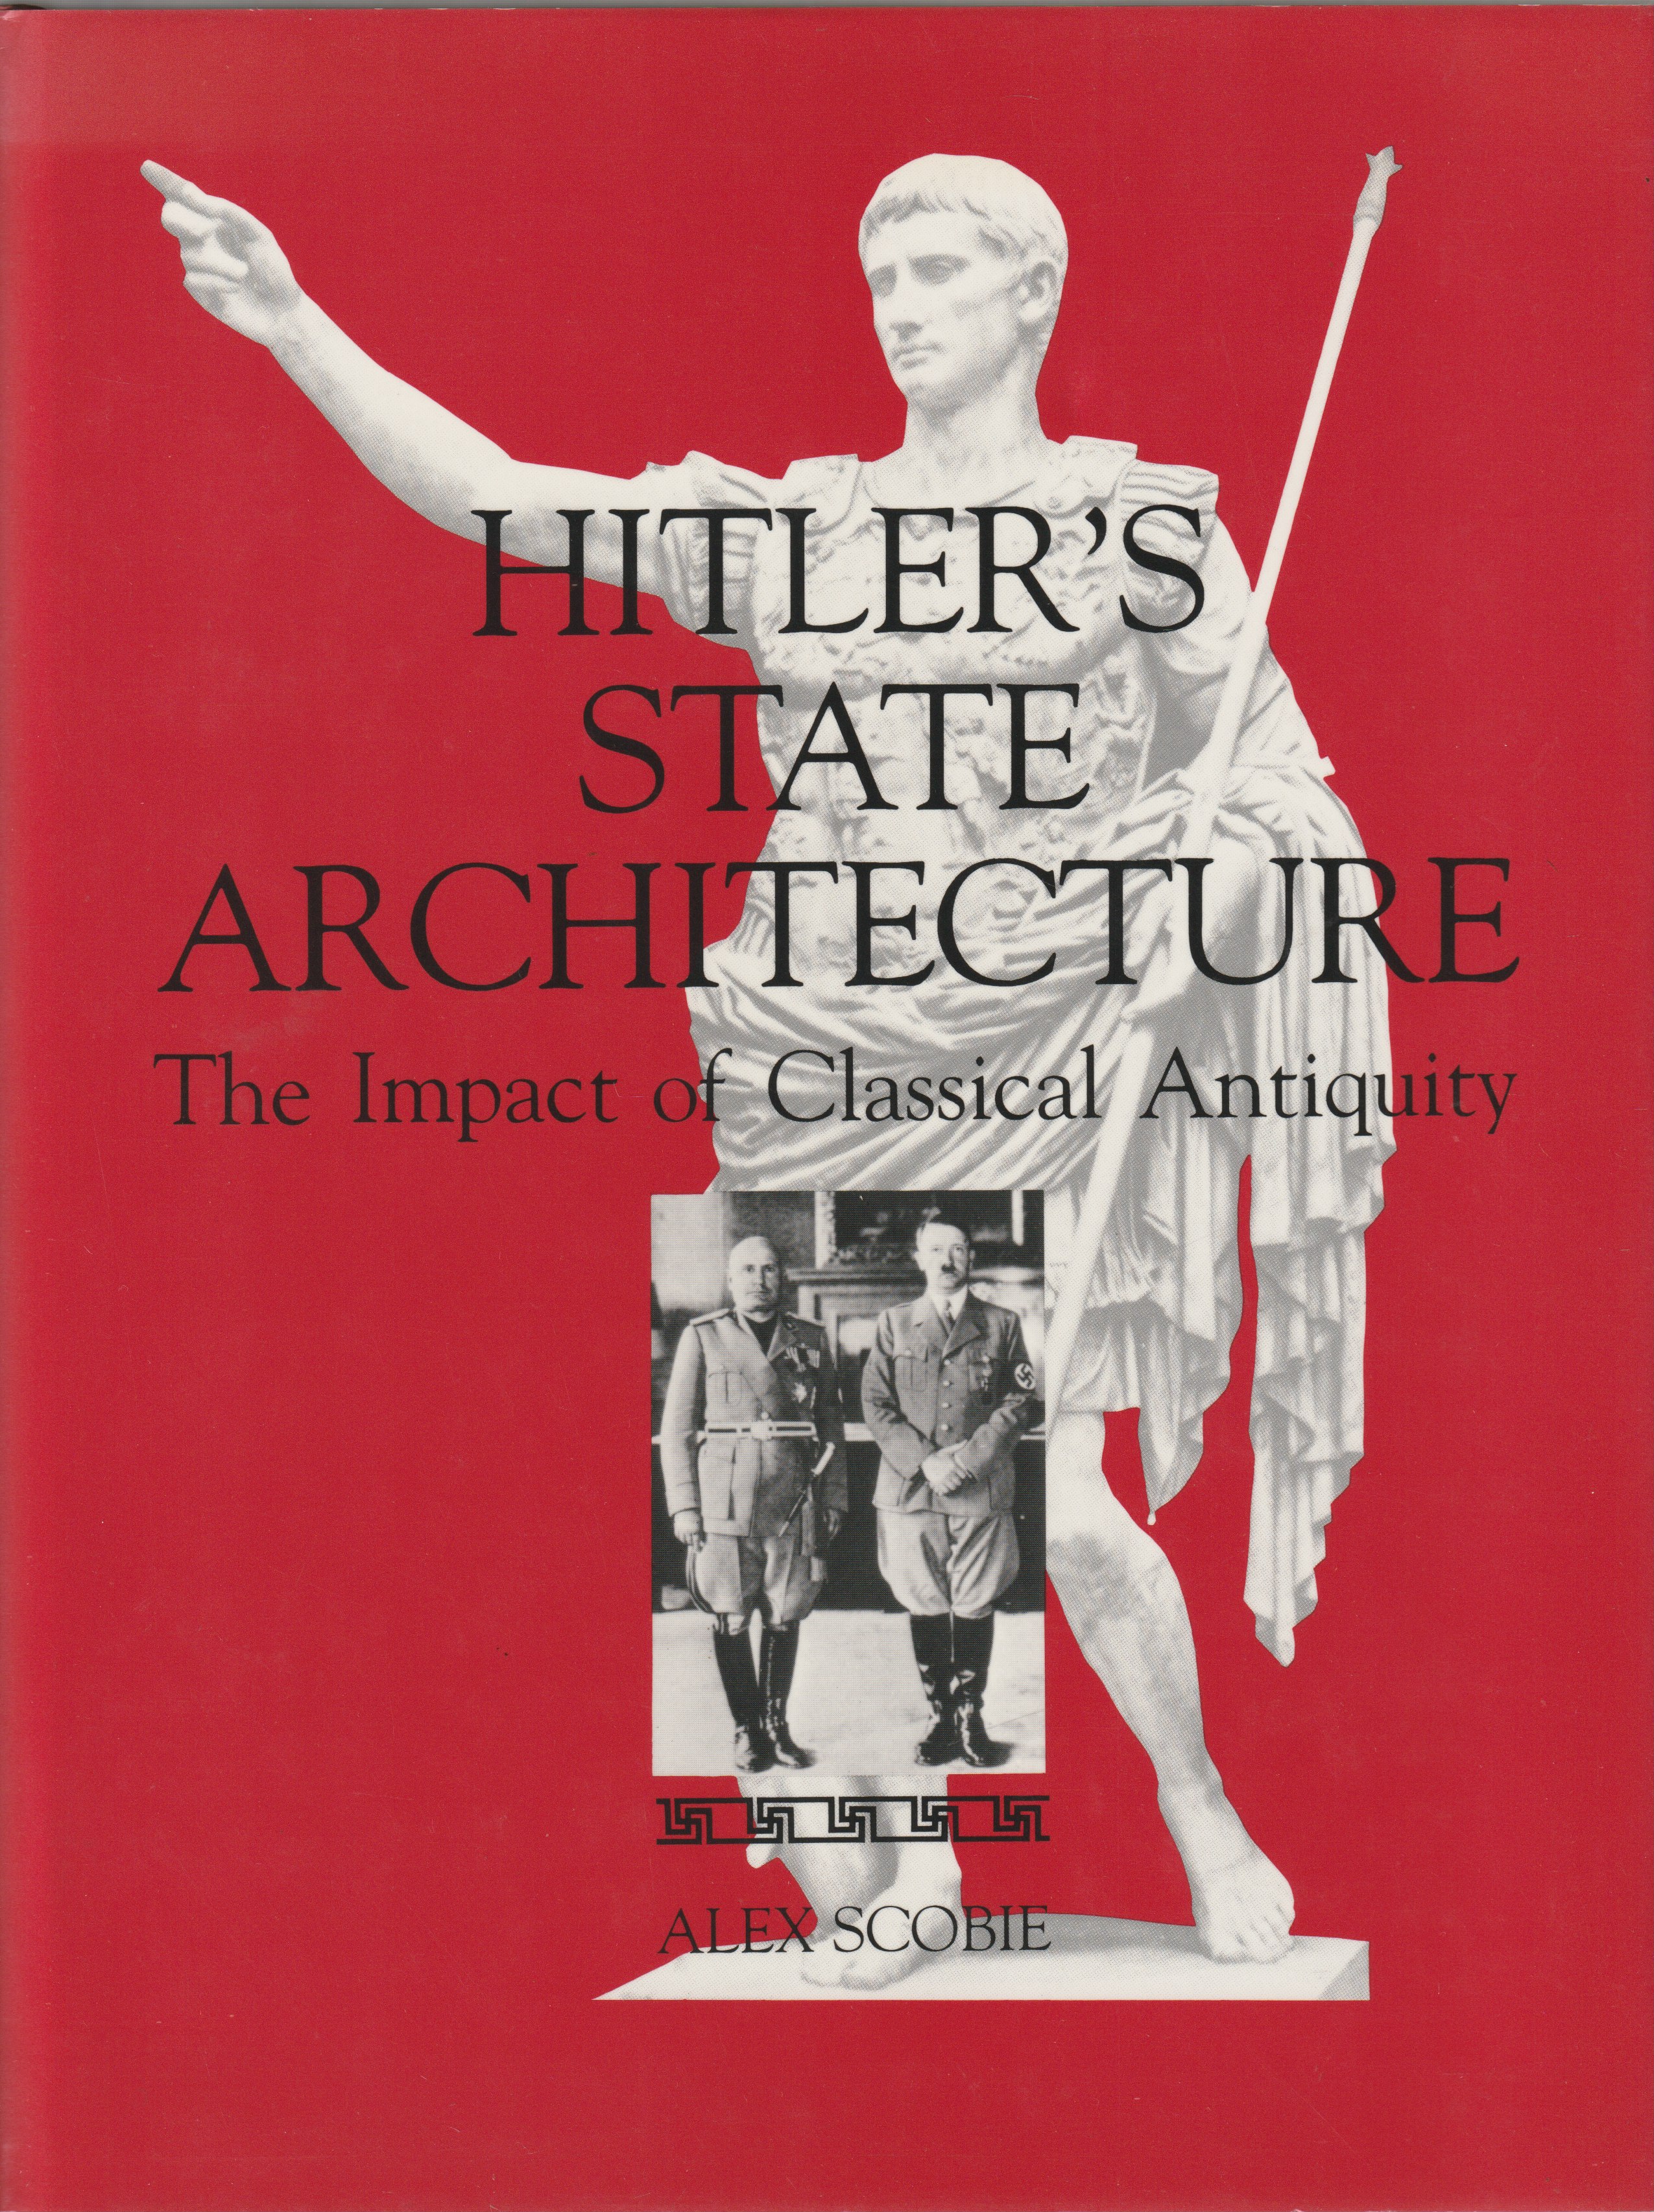 Hitler's state architecture : the impact of classical antiquity